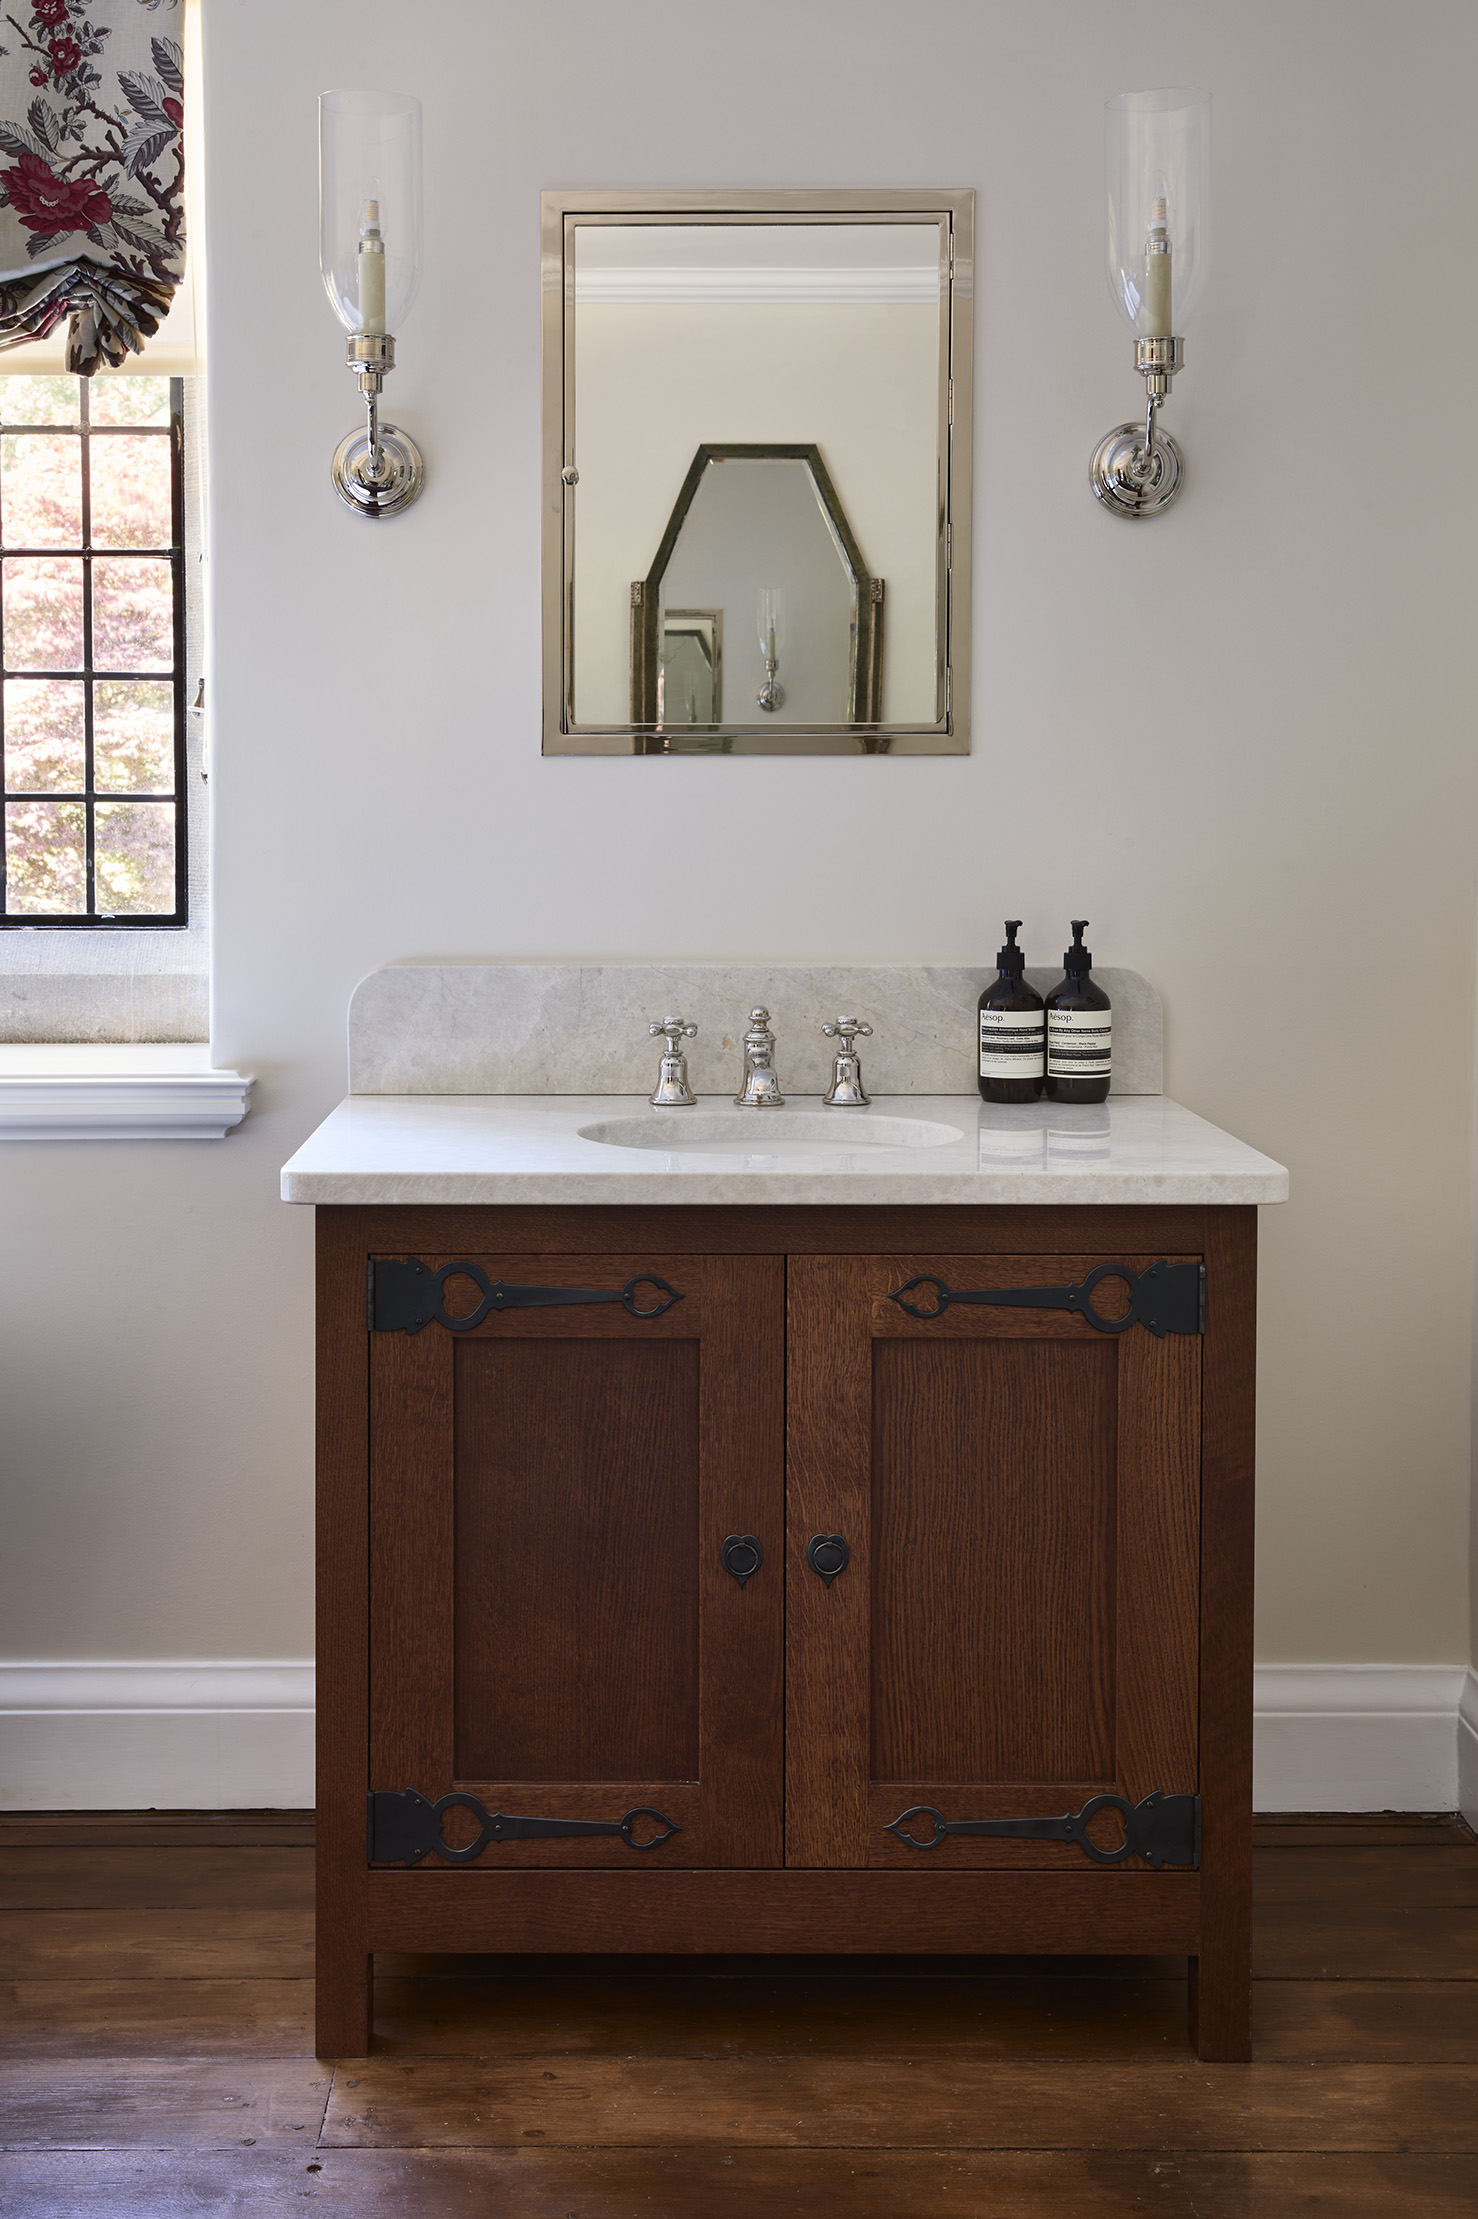 An Arts & Crafts inspired bathroom vanity units in dark stained oak with cream marble top 